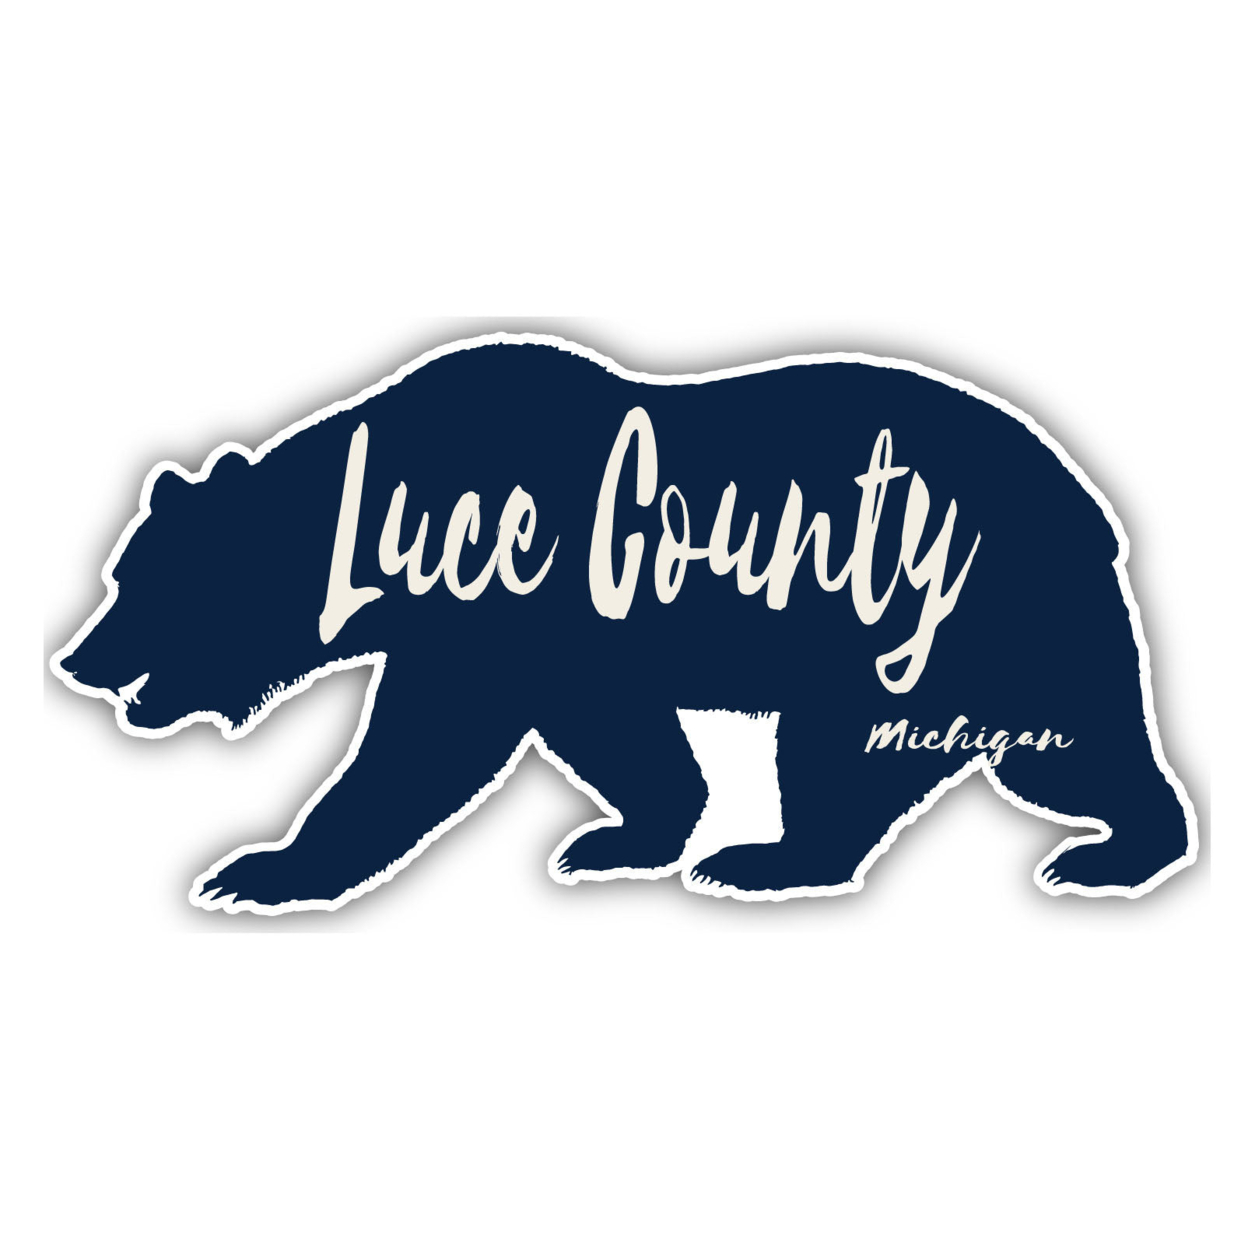 Luce County Michigan Souvenir Decorative Stickers (Choose Theme And Size) - 2-Inch, Bear